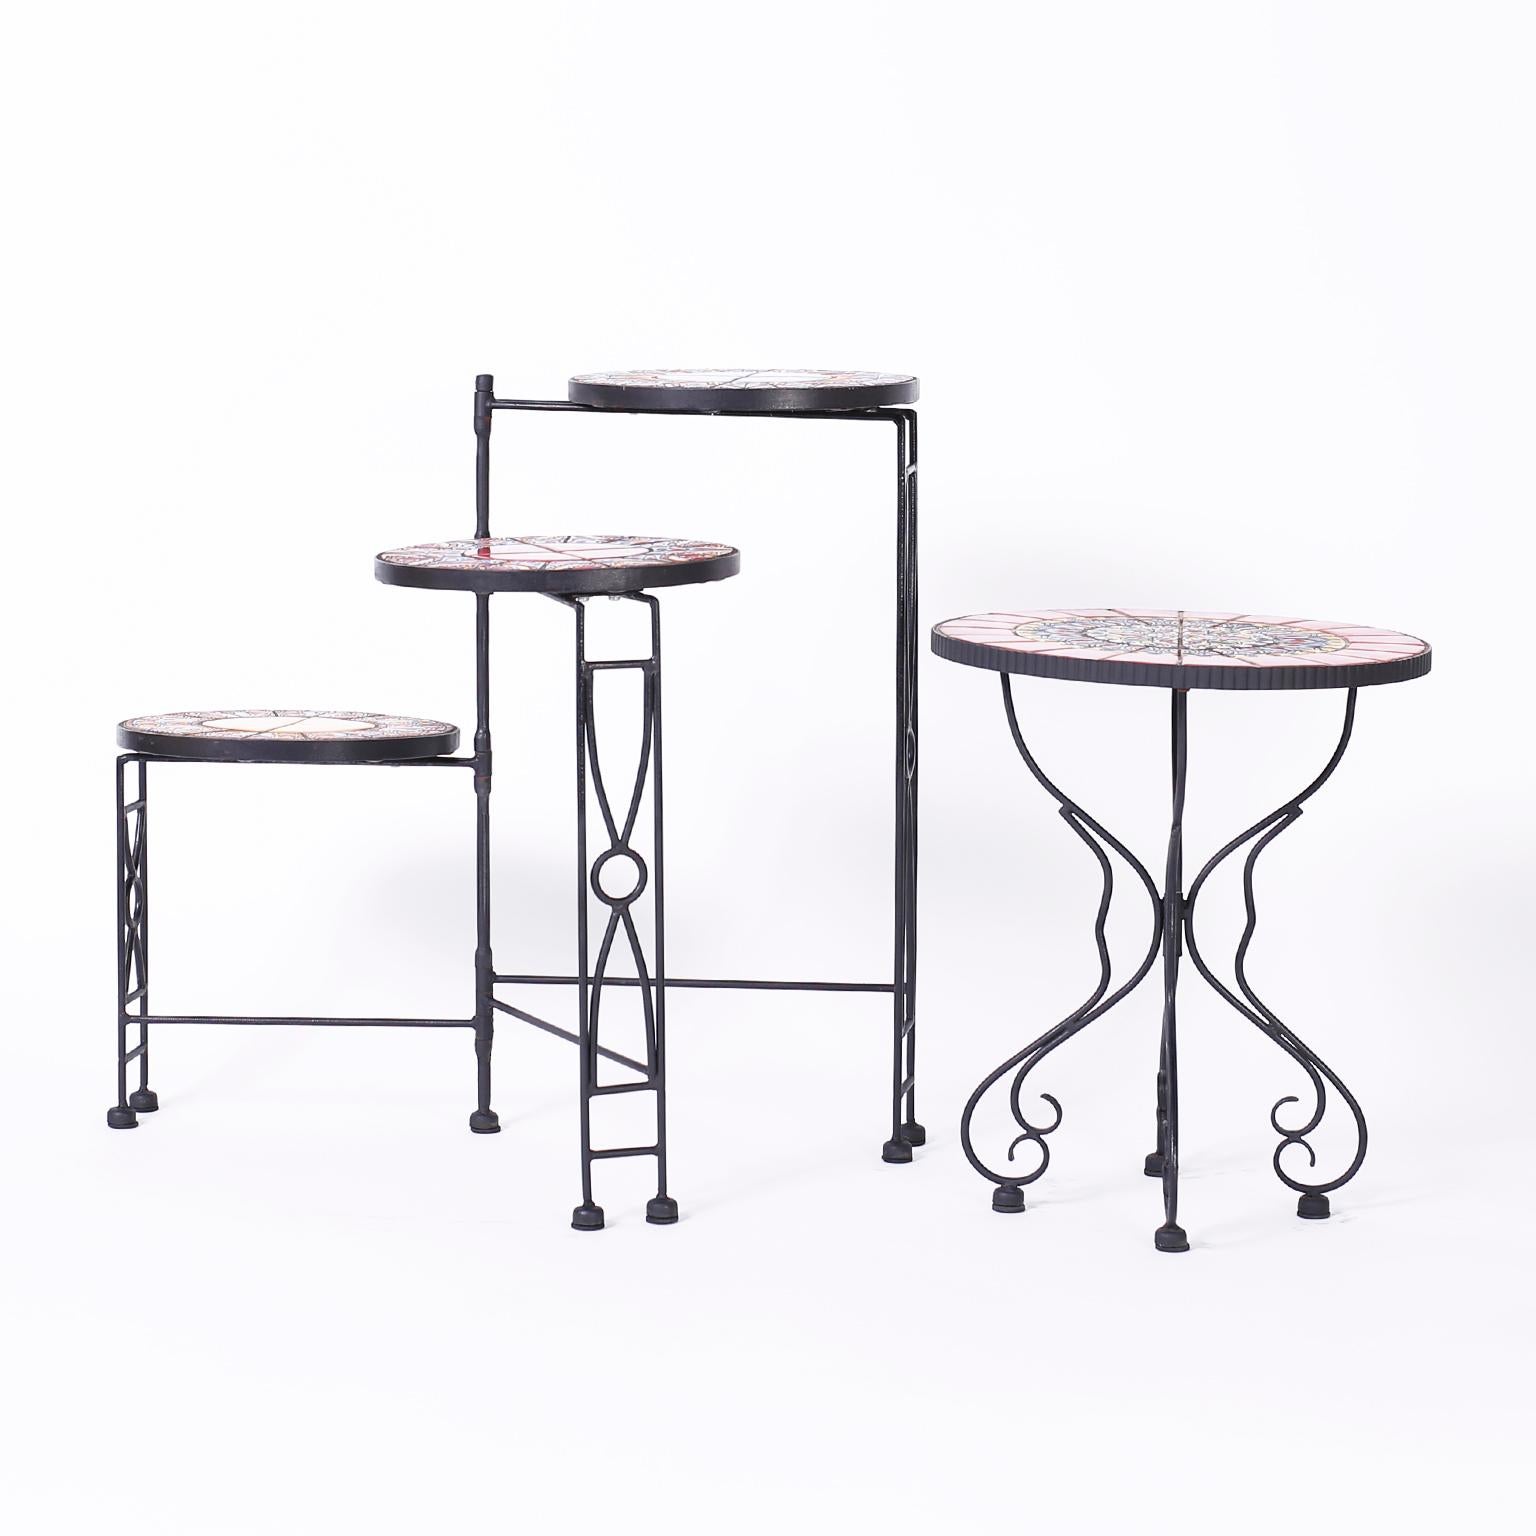 French Provincial Three-Tiered Tile Top and Iron Plant Stand